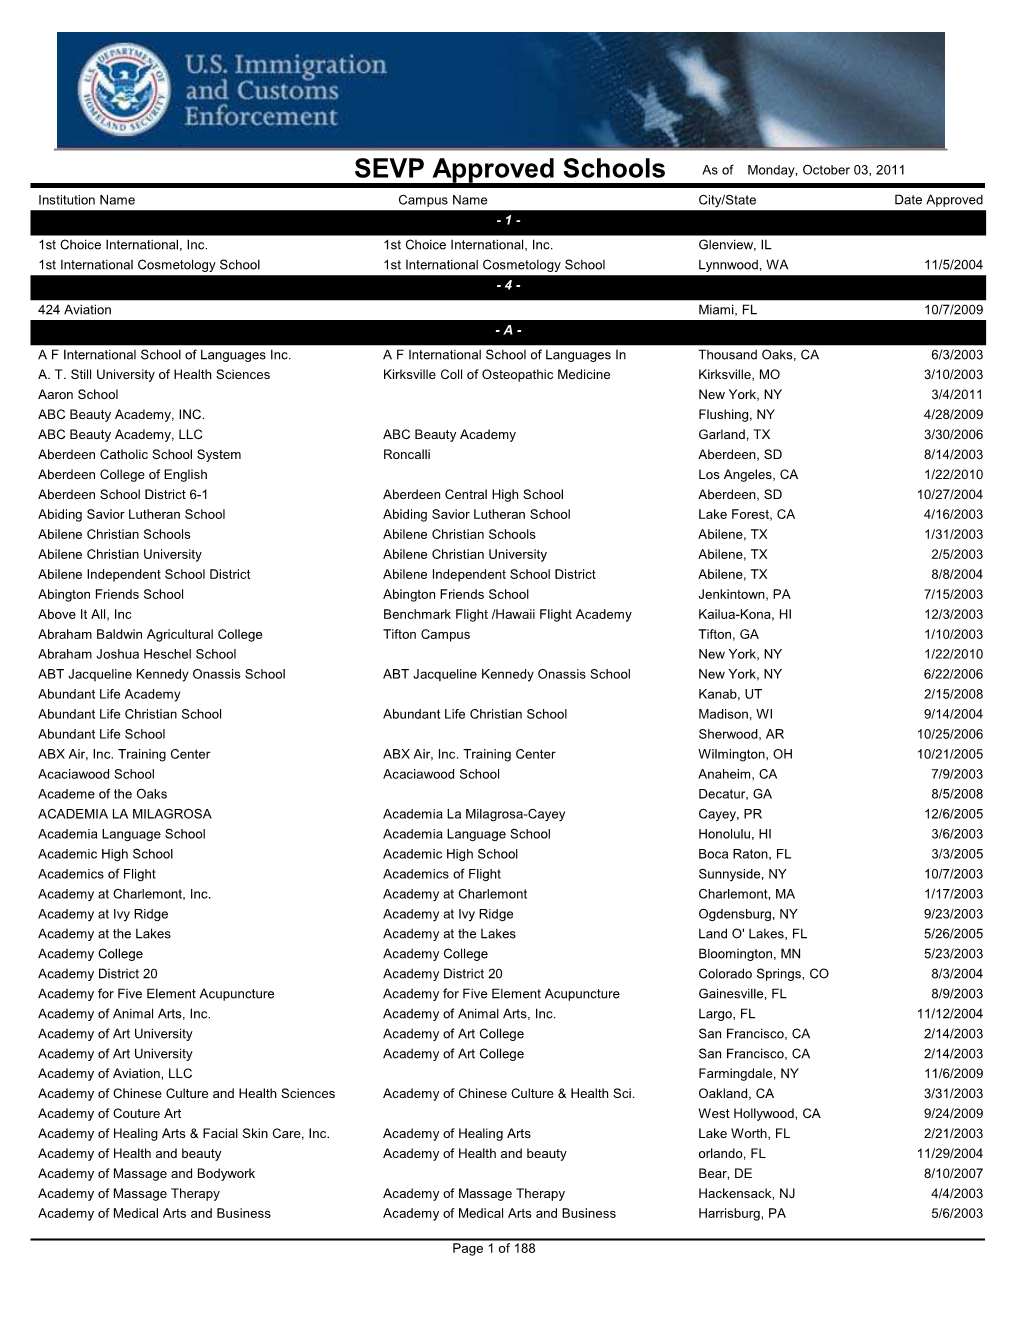 SEVP Approved Schools As of Monday, October 03, 2011 Institution Name Campus Name City/State Date Approved - 1